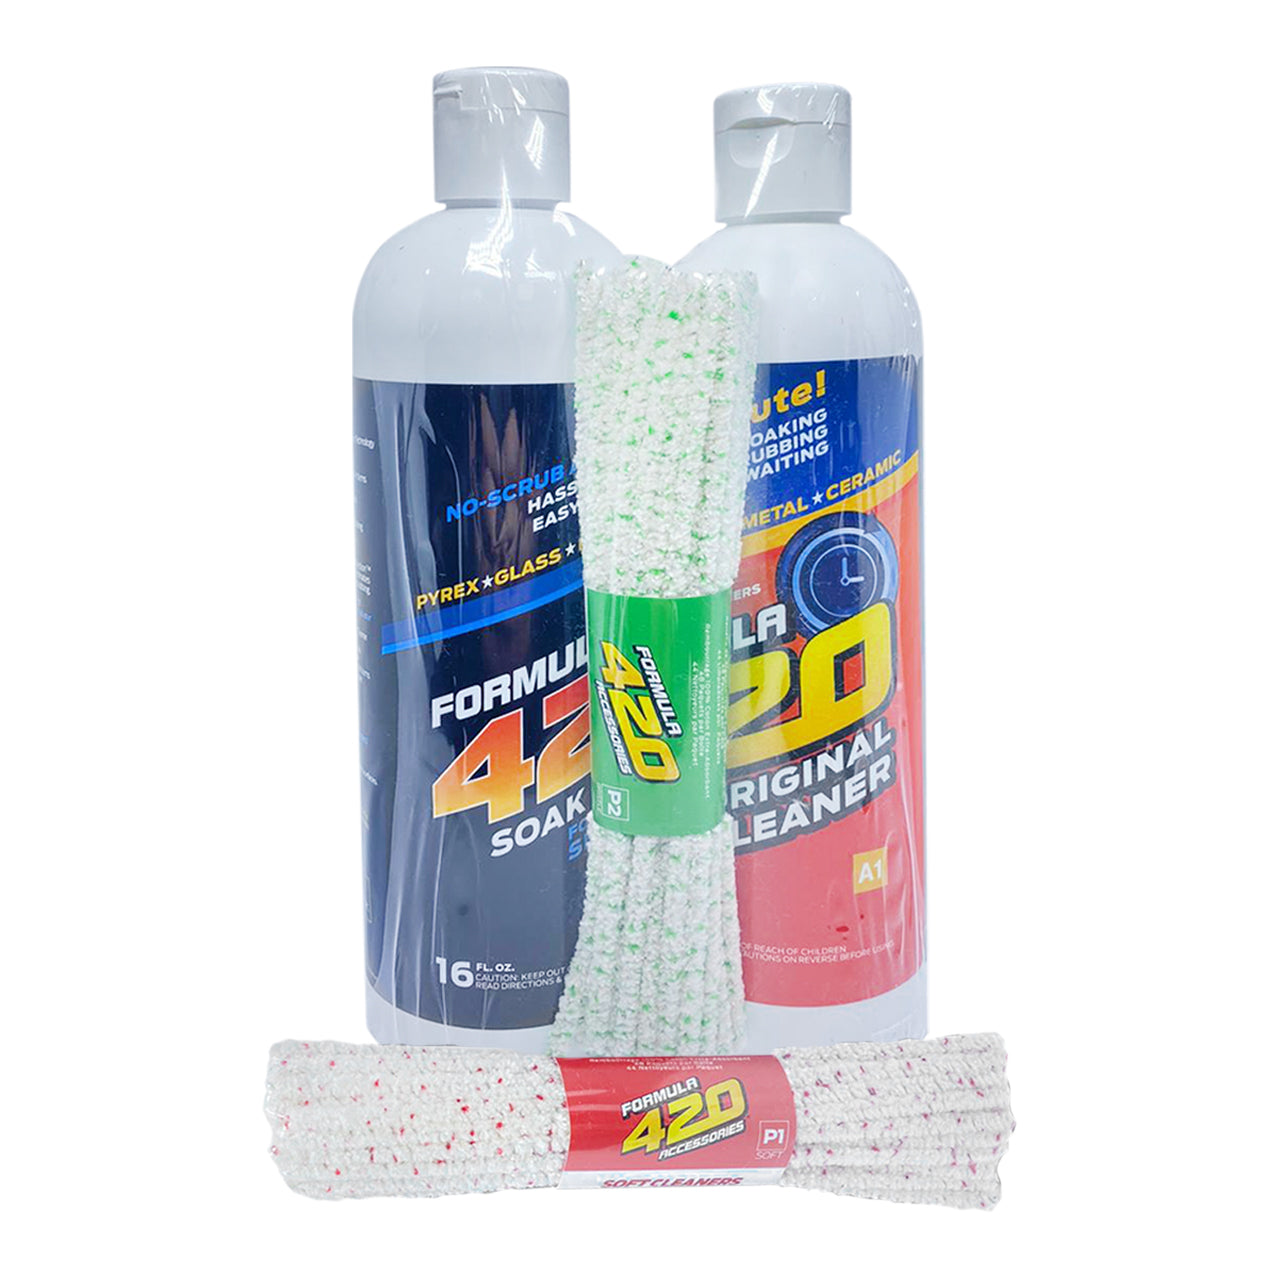 420 CLEANING KIT